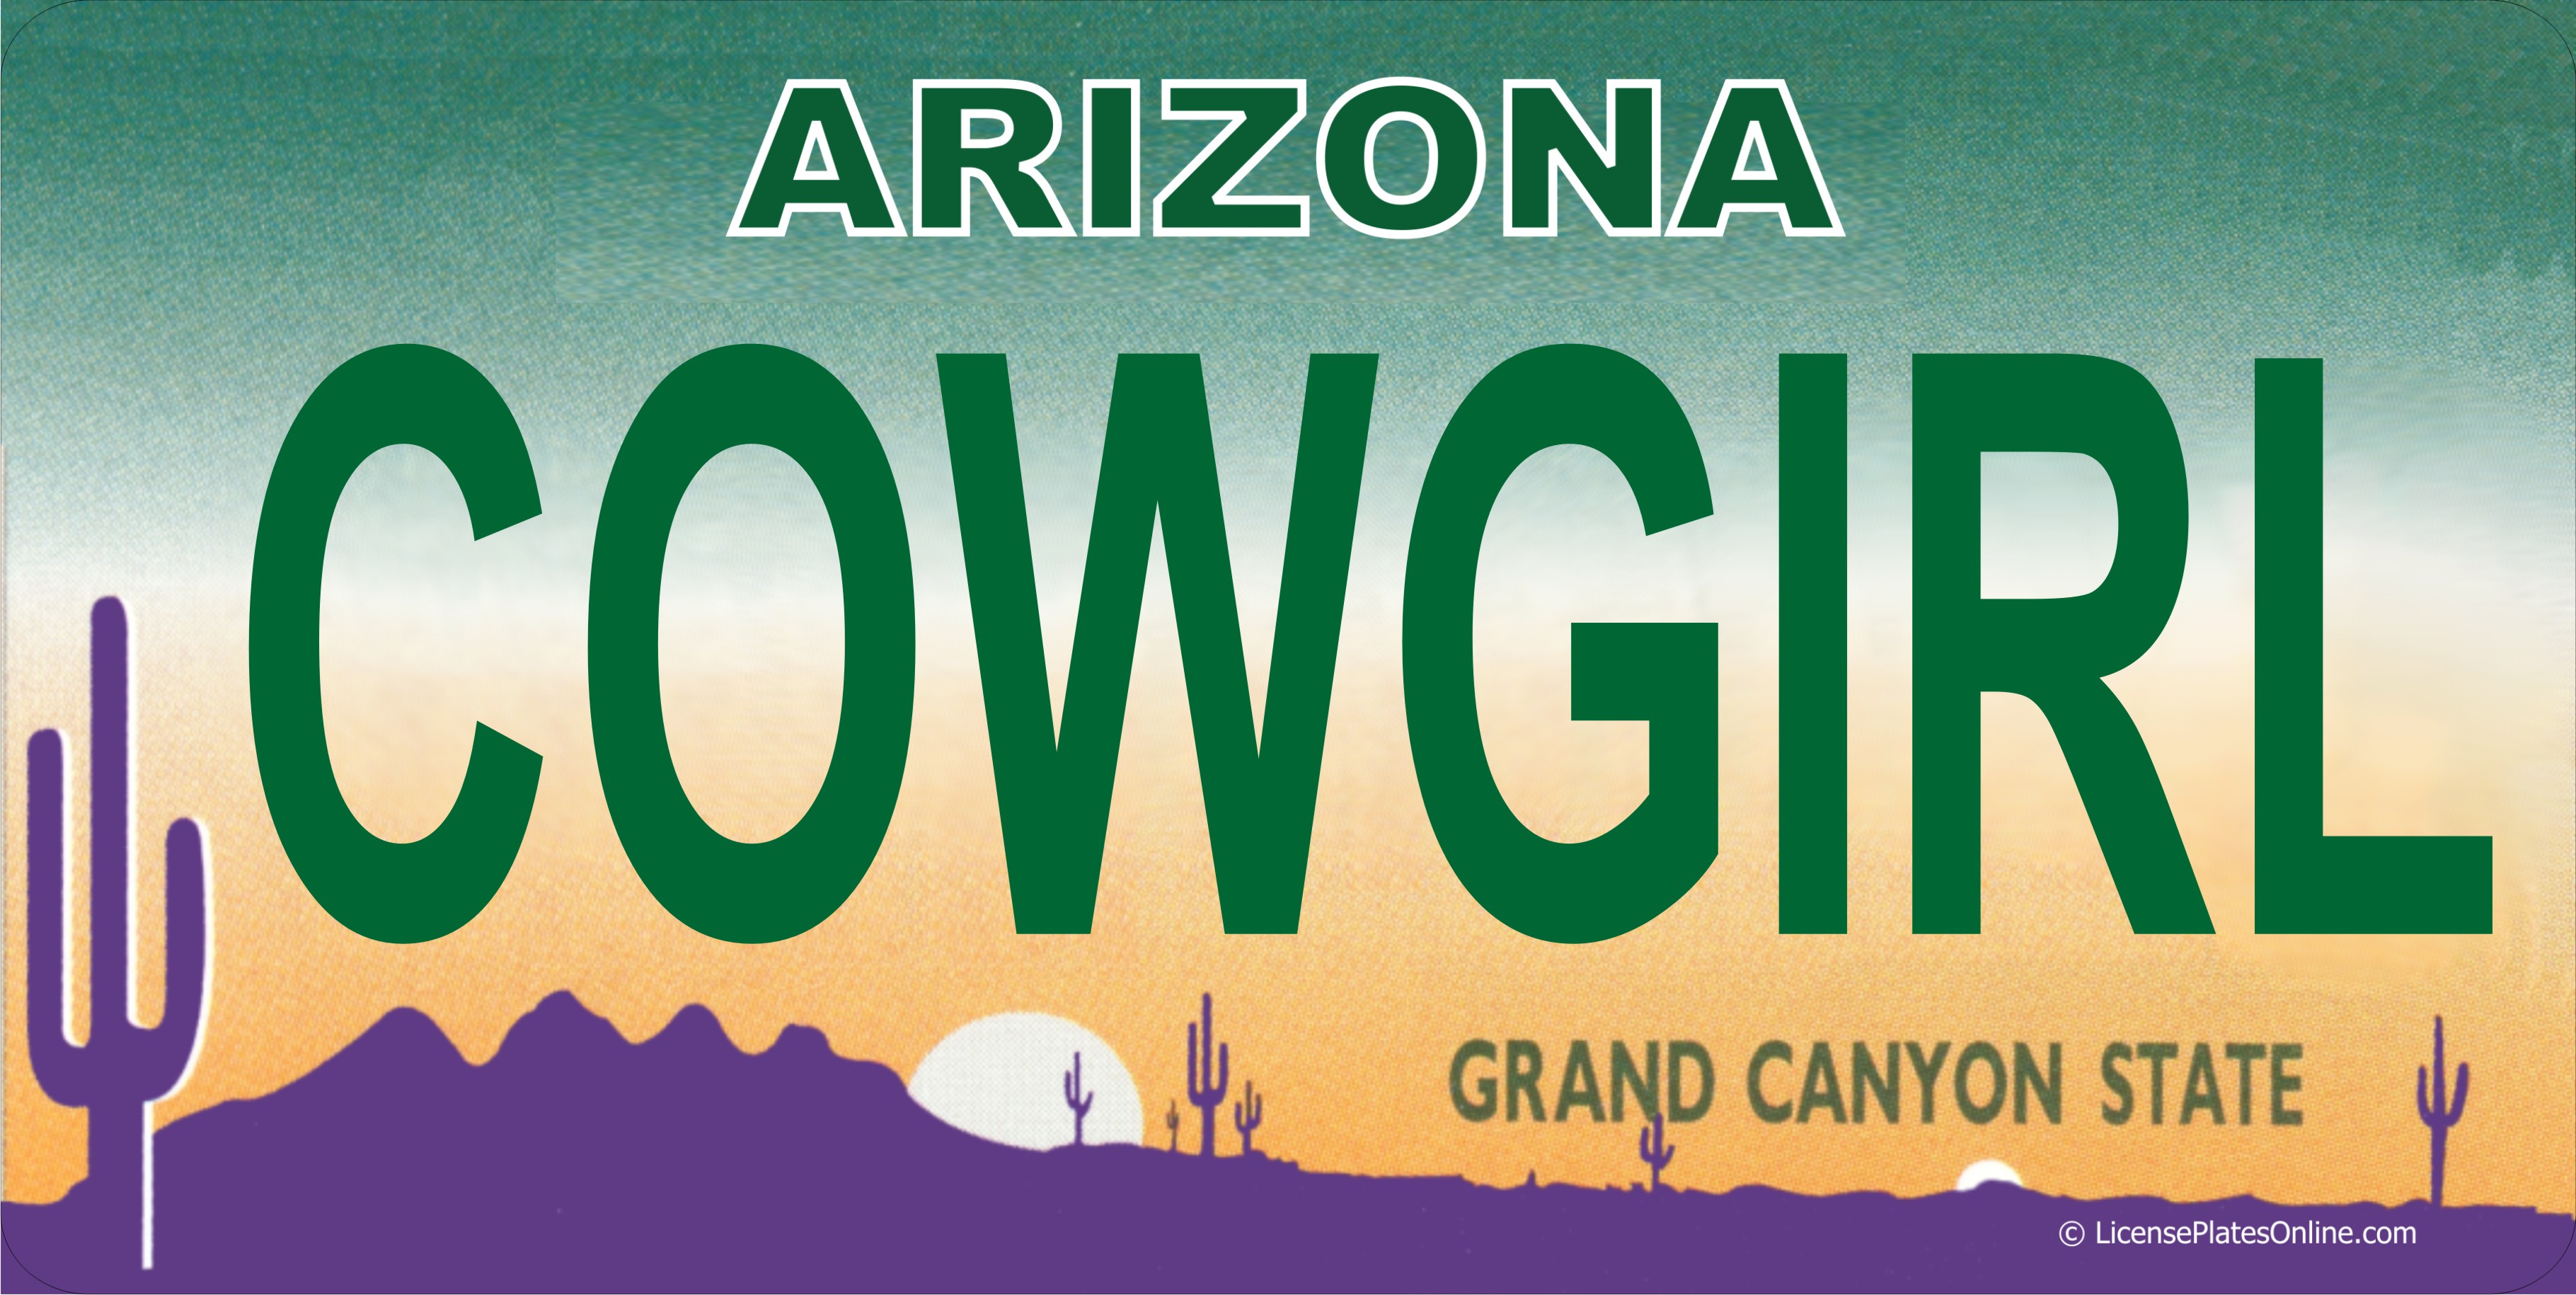 Arizona COWGIRL Photo LICENSE PLATE   Free Personalization on this PLATE